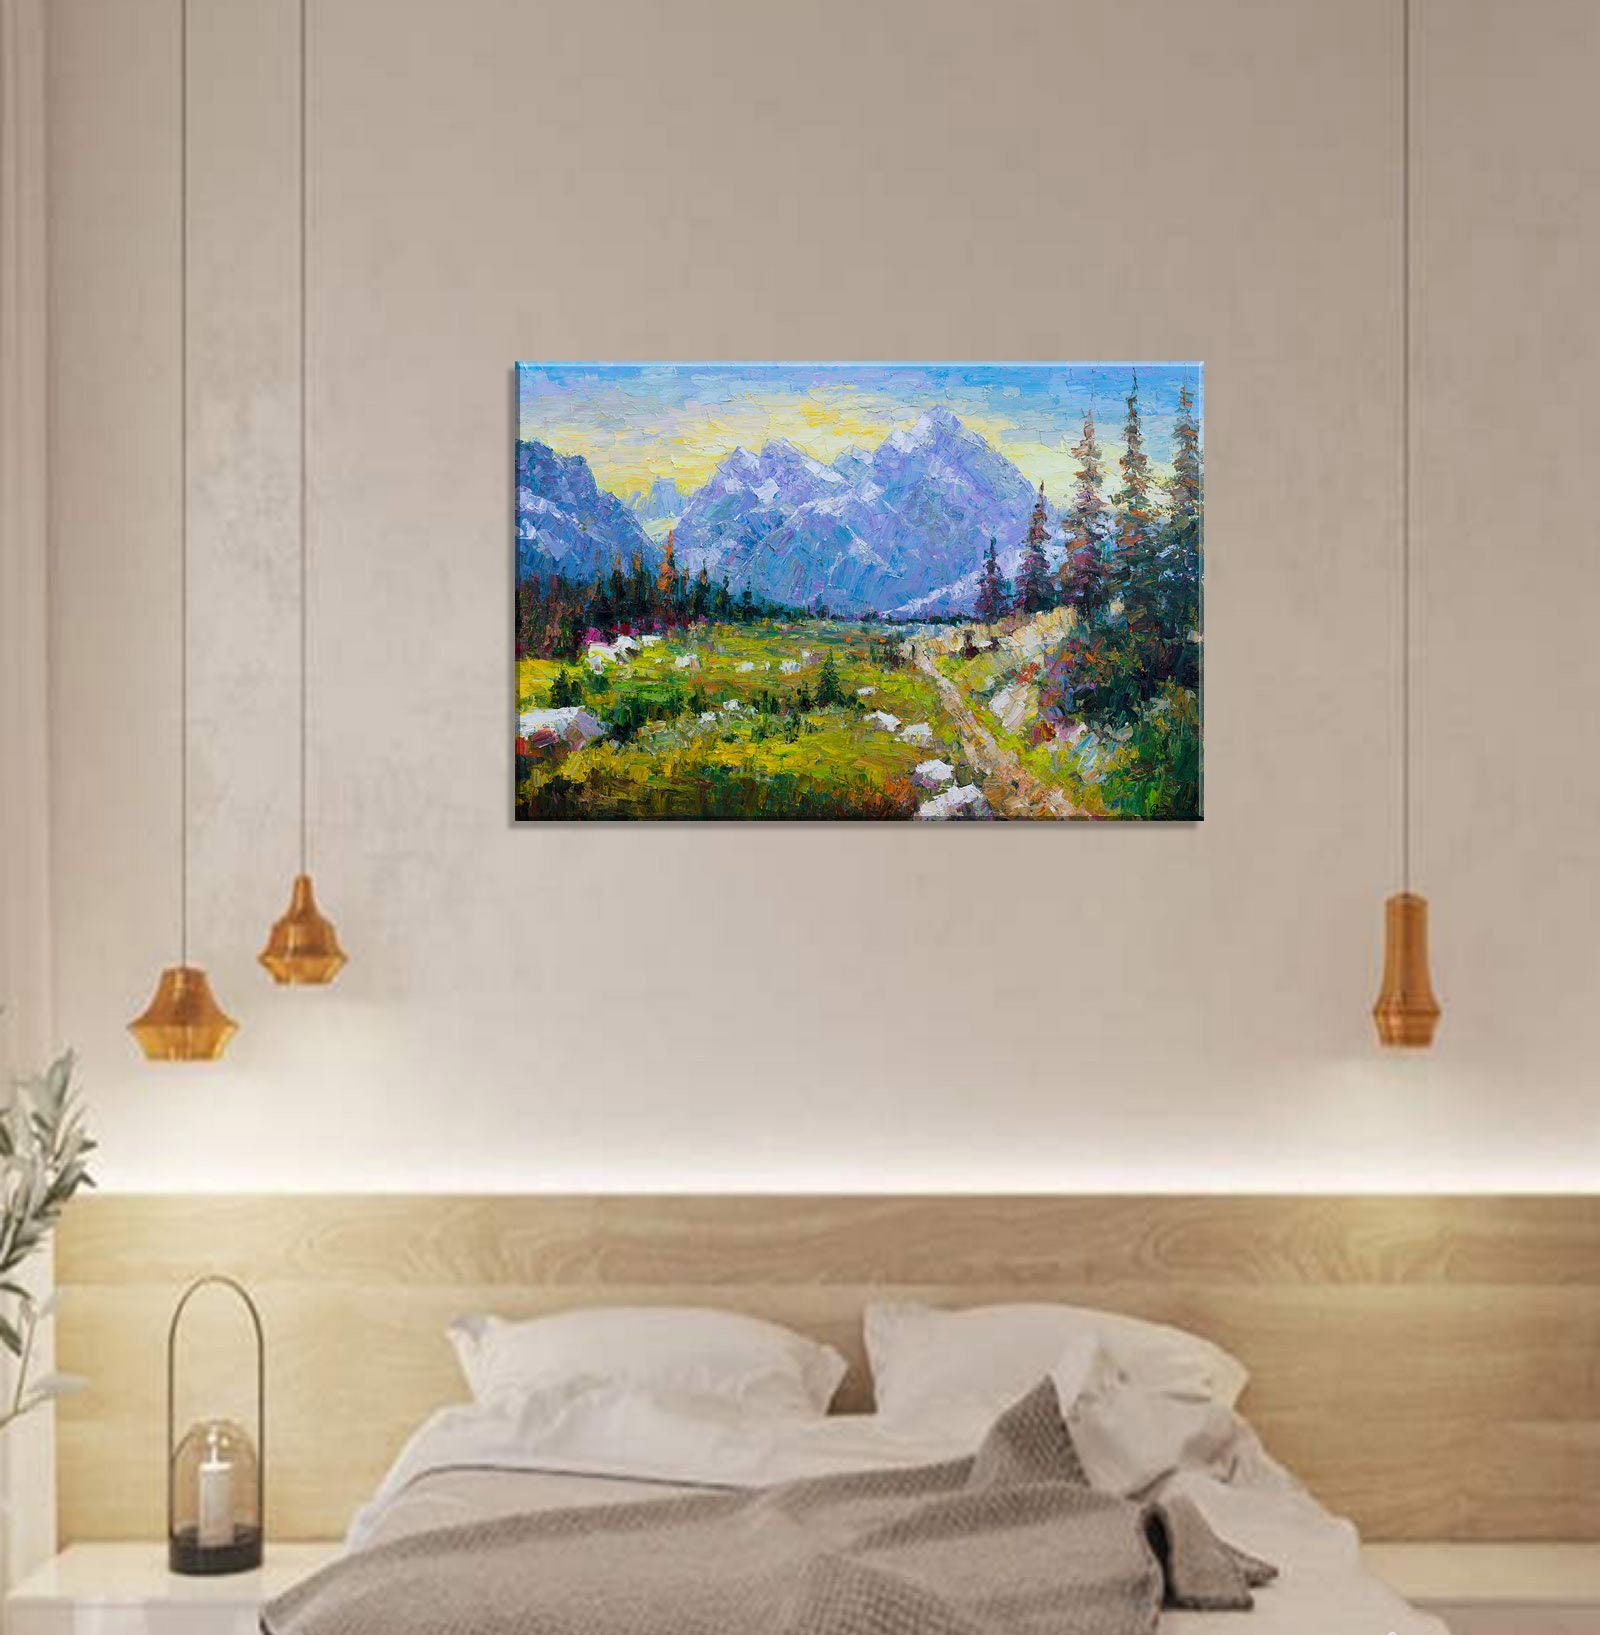 Buy Breathtaking Spring Scenery: Palette Knife Oil Painting of Grass, Trees  & Snowy Mountains, 32x48 Inches Ready to Hang Artwork Online in India 